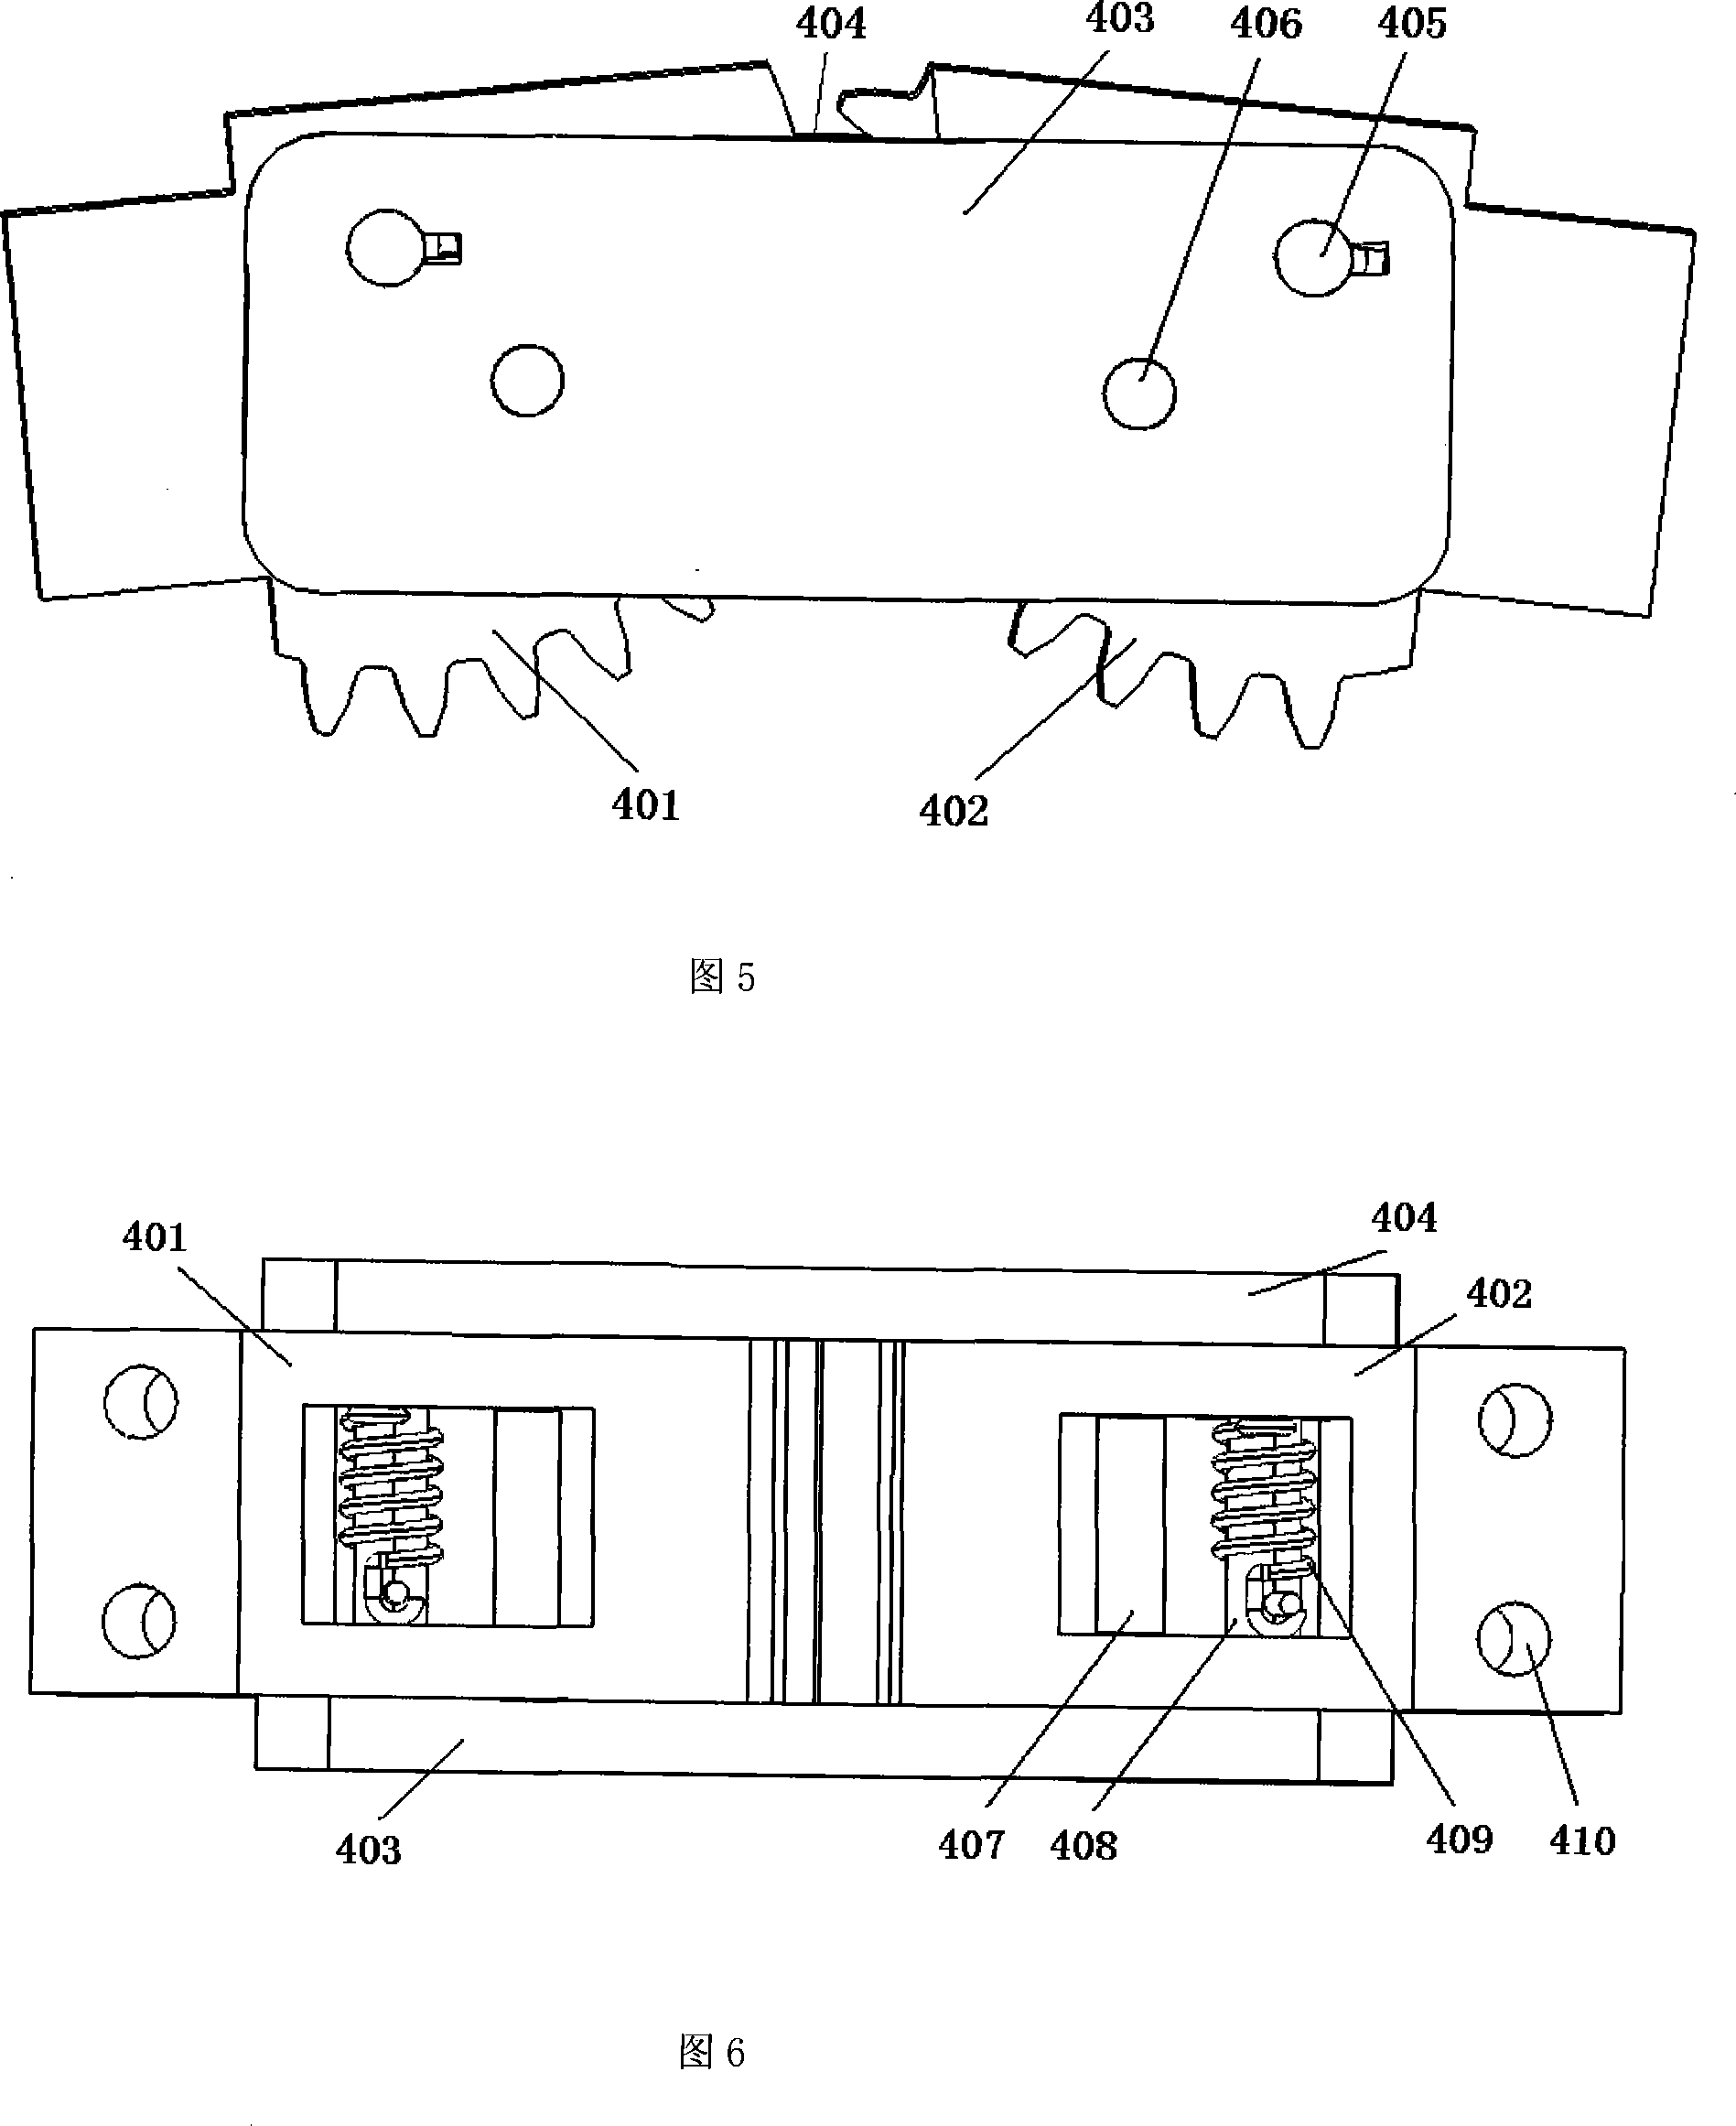 Space extensible catopter device